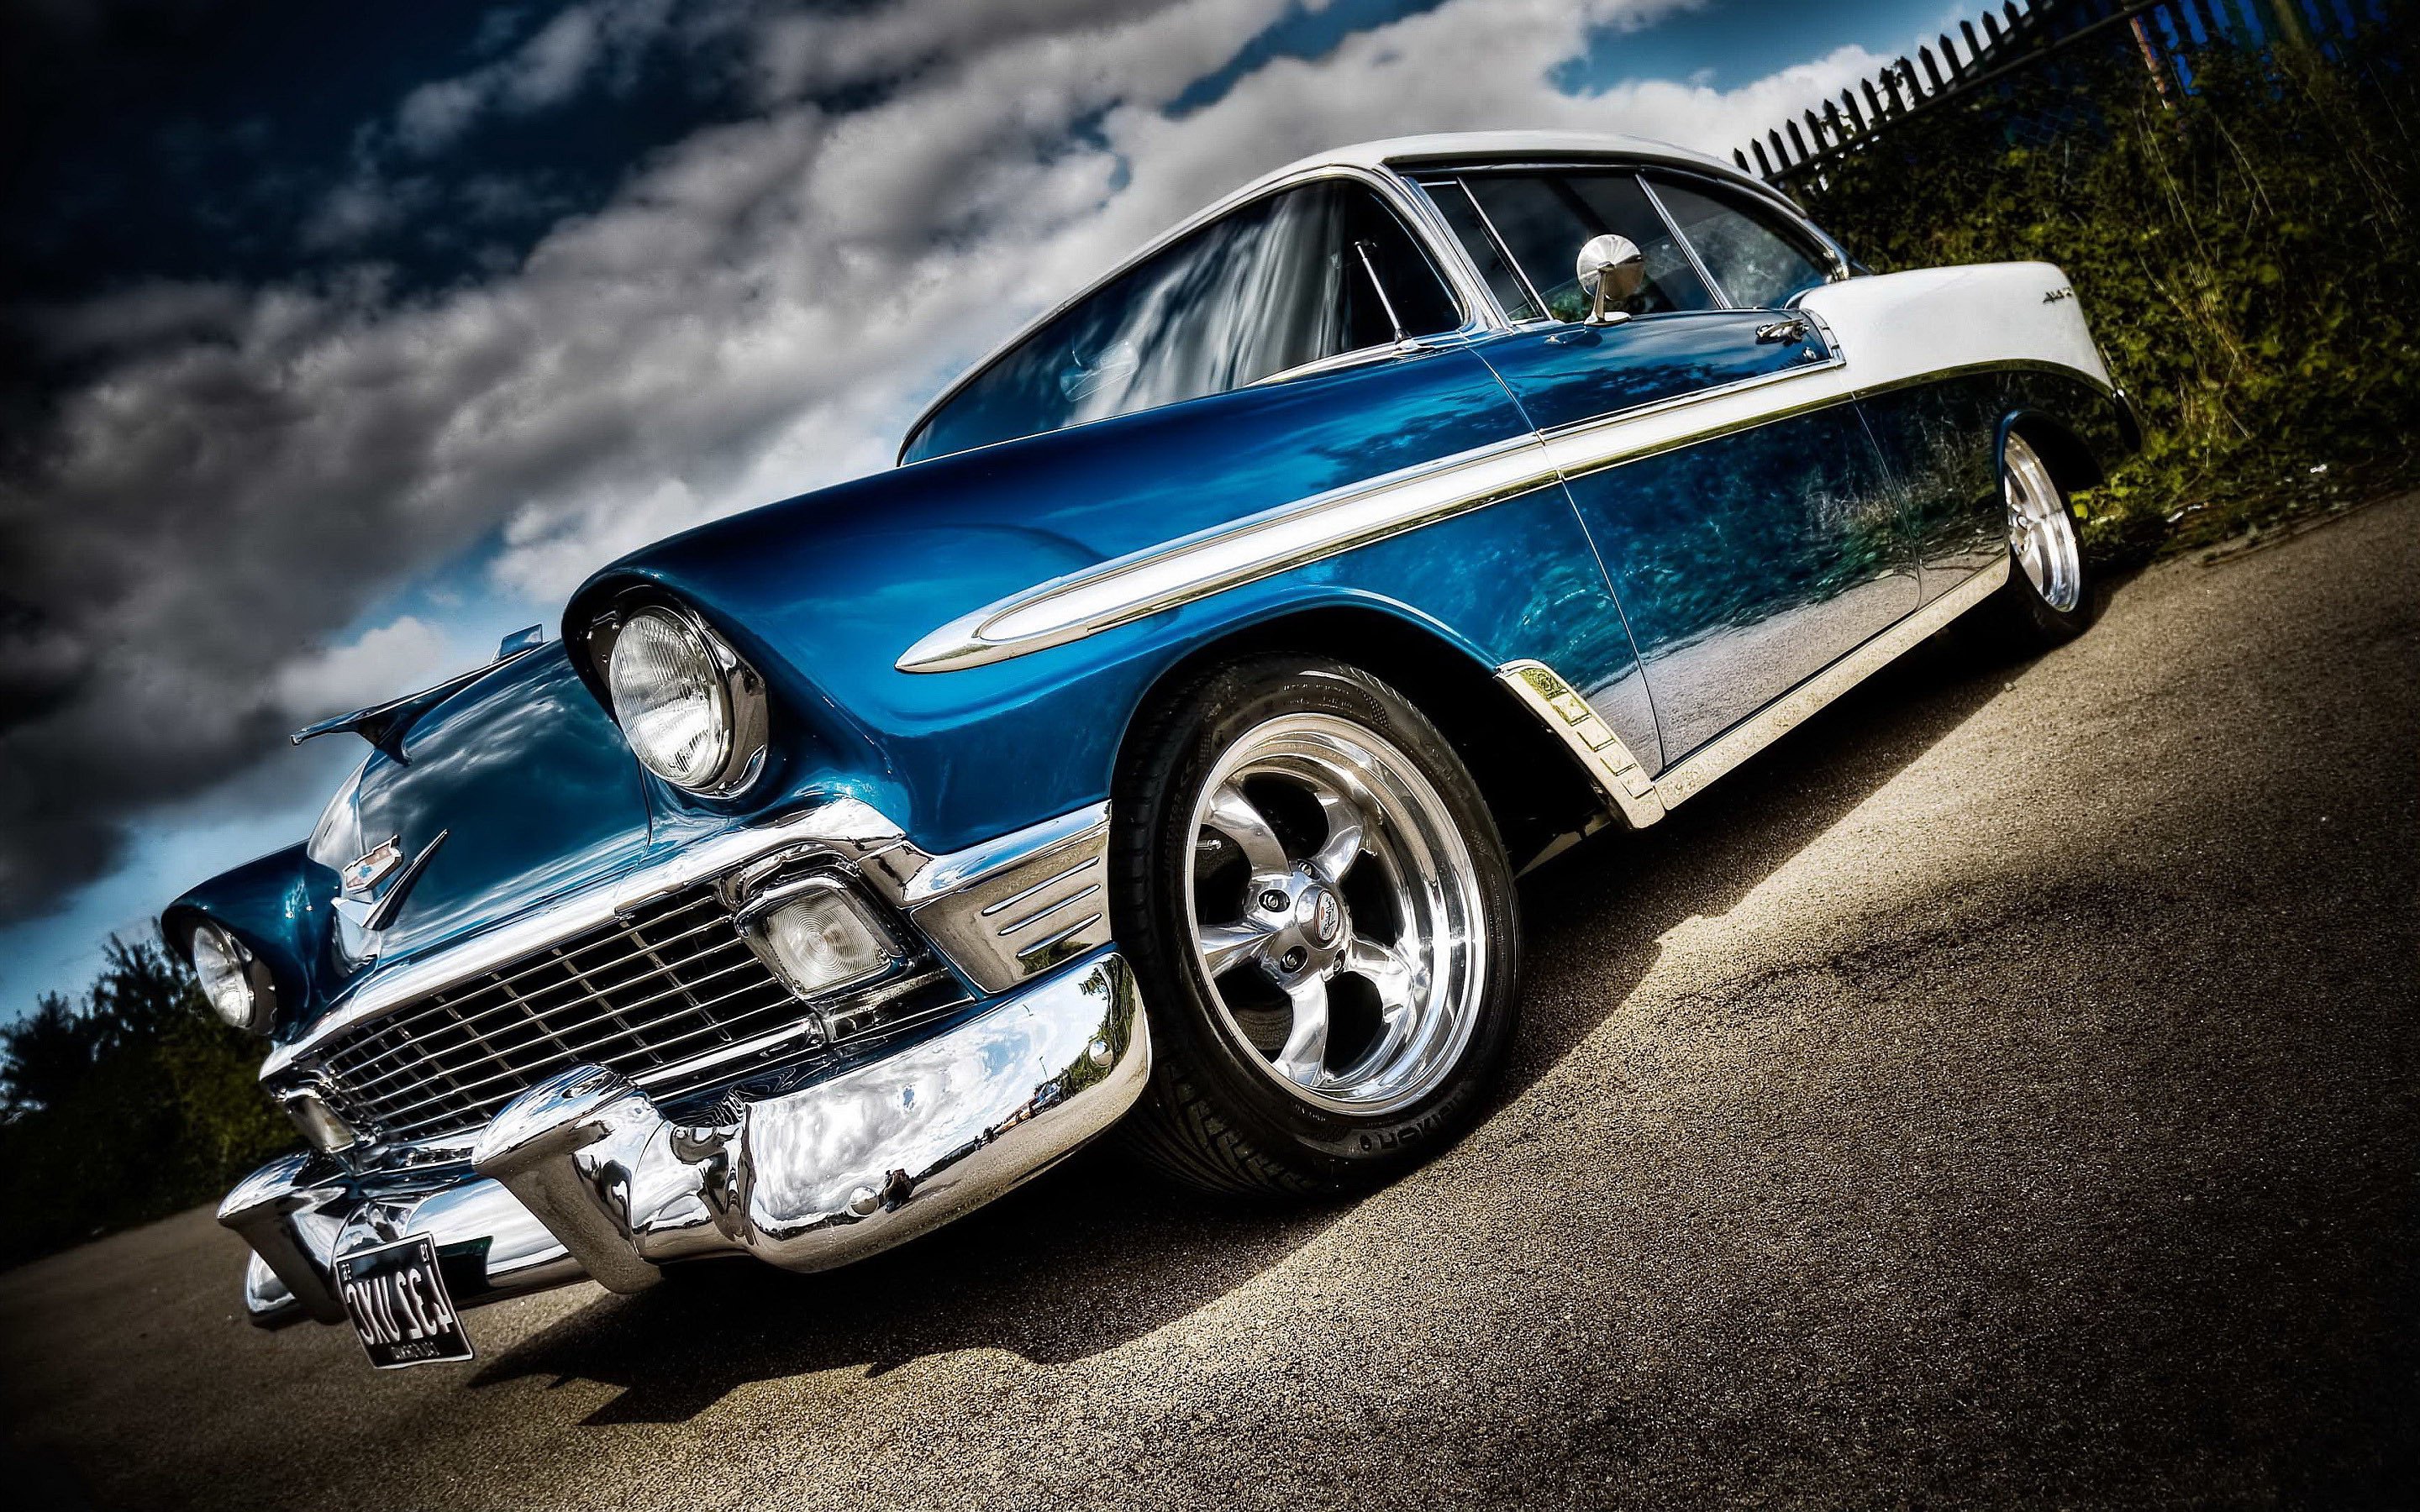 2880x1800 WallpapersWide.com | Classic Cars HD Desktop Wallpapers for .